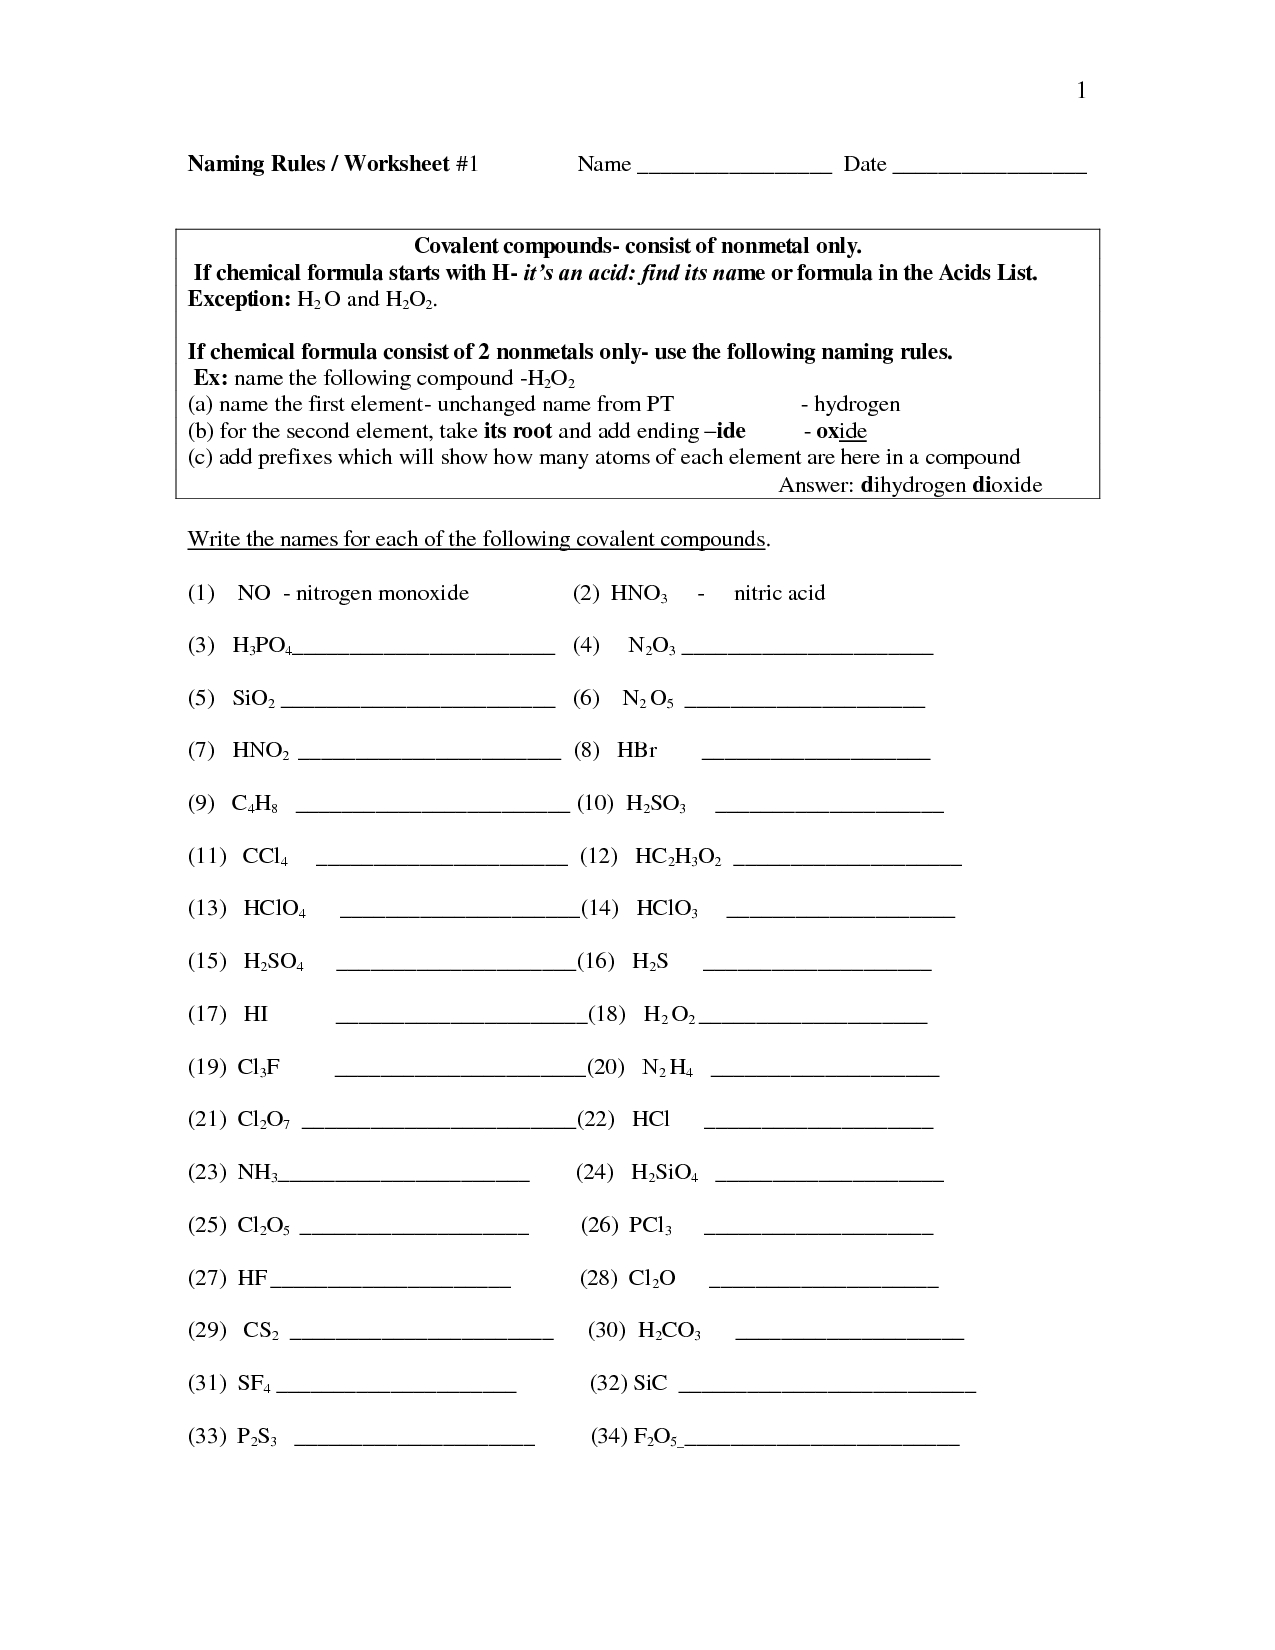 Naming Chemical Compounds Worksheet With Answers